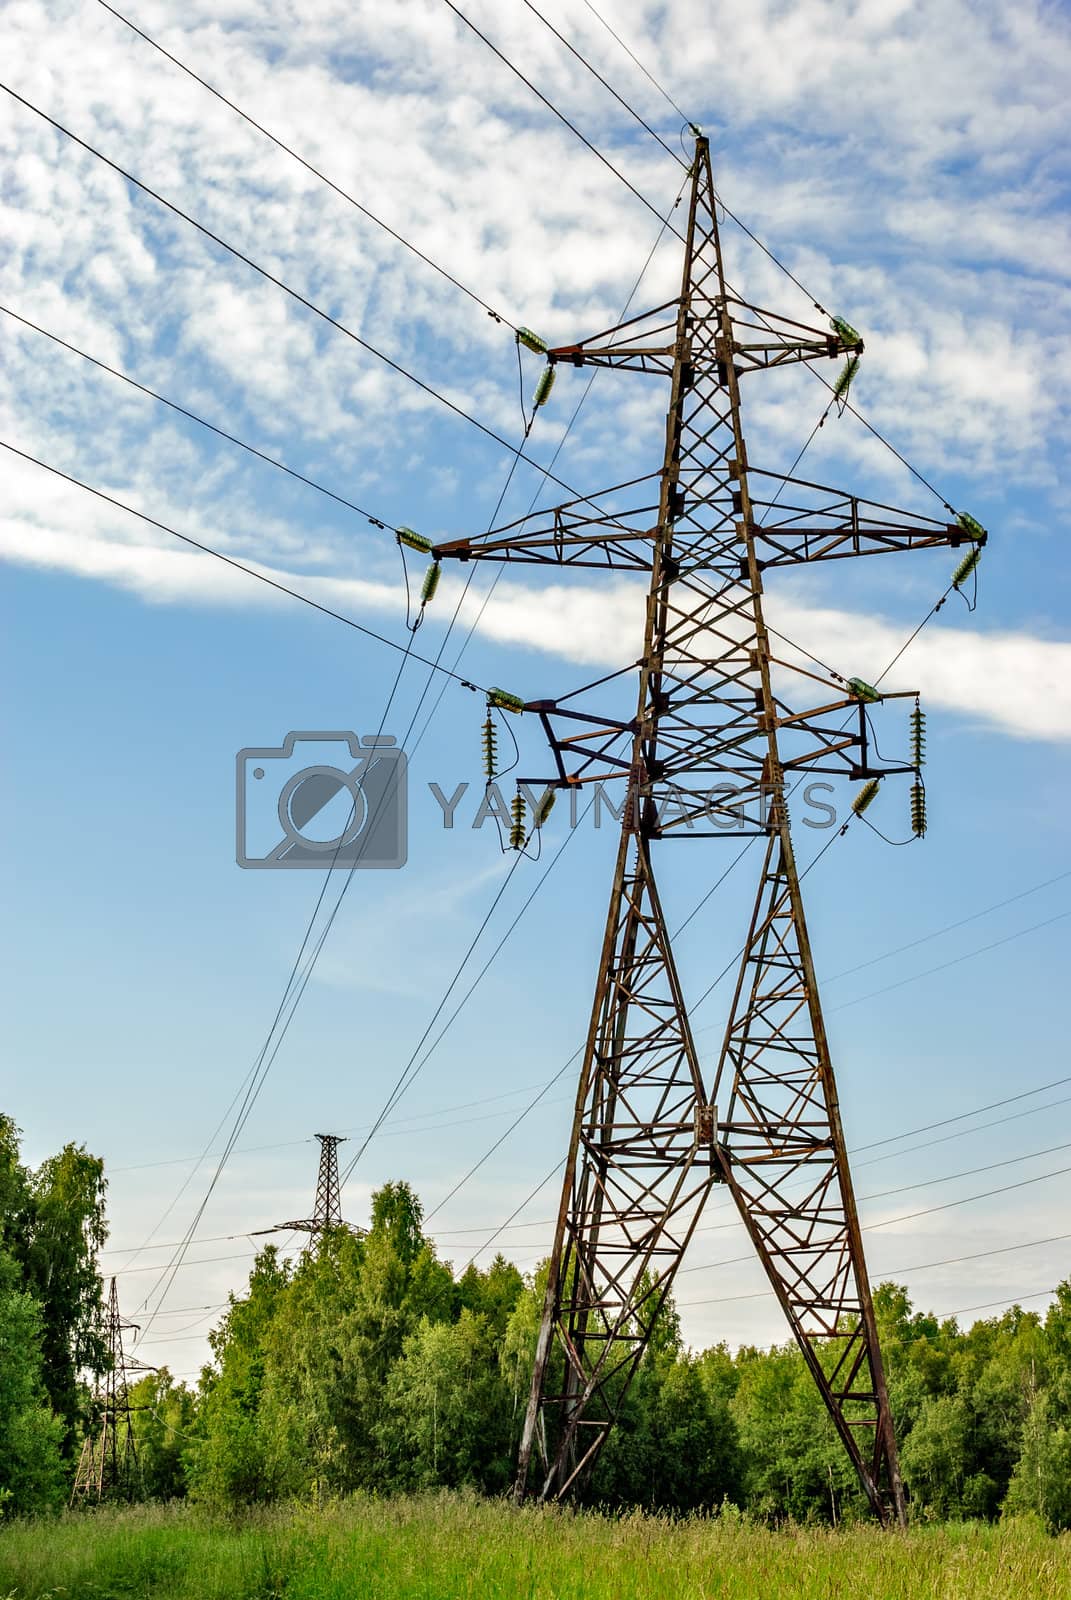 Royalty free image of High voltage power lines by mahout